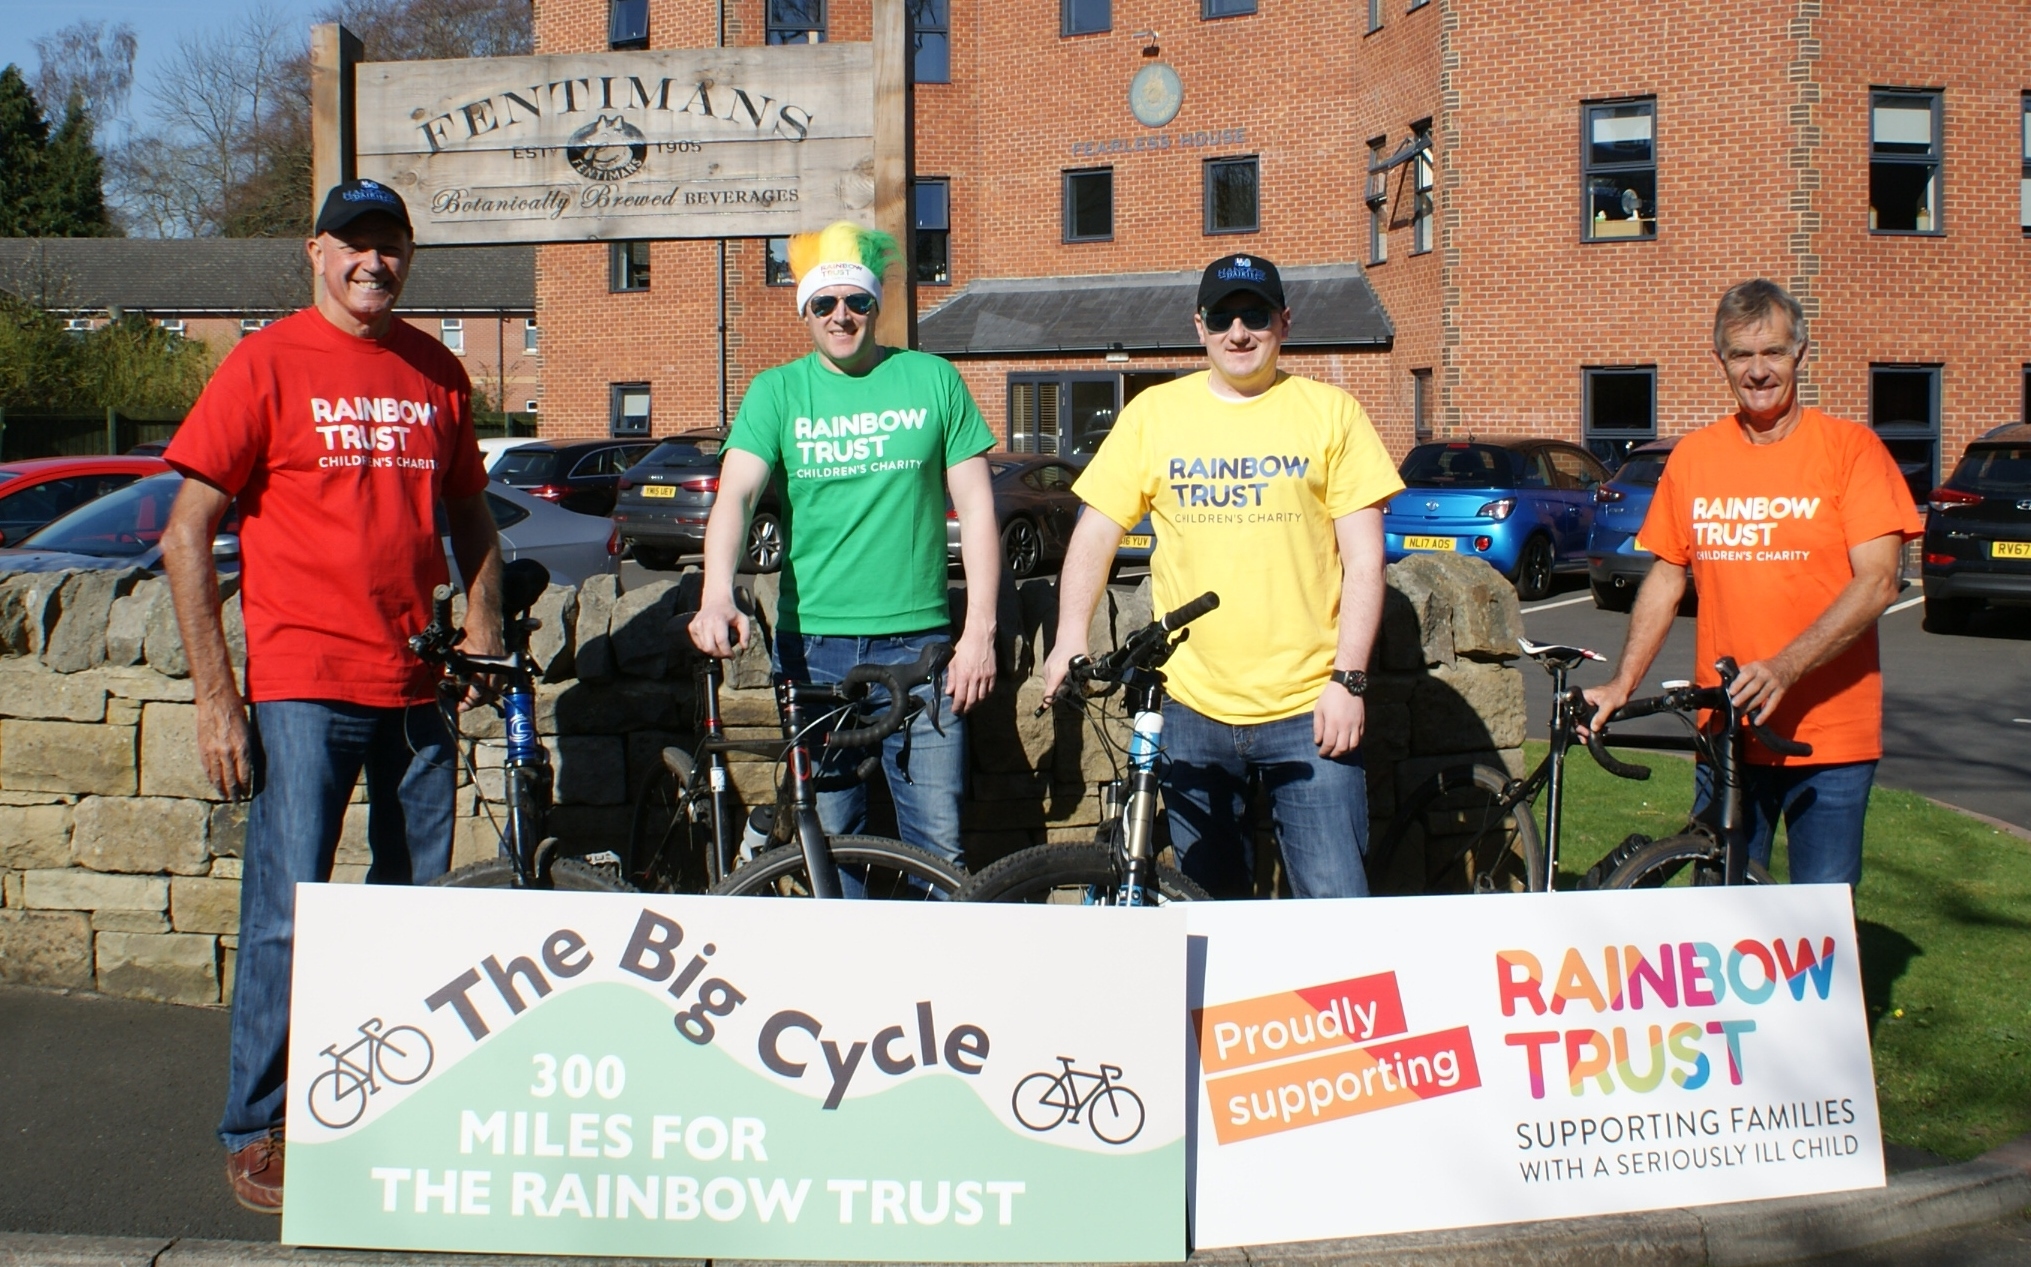 Hanover Dairies and Fentimans 300 mile bike ride to support families with a seriously ill child